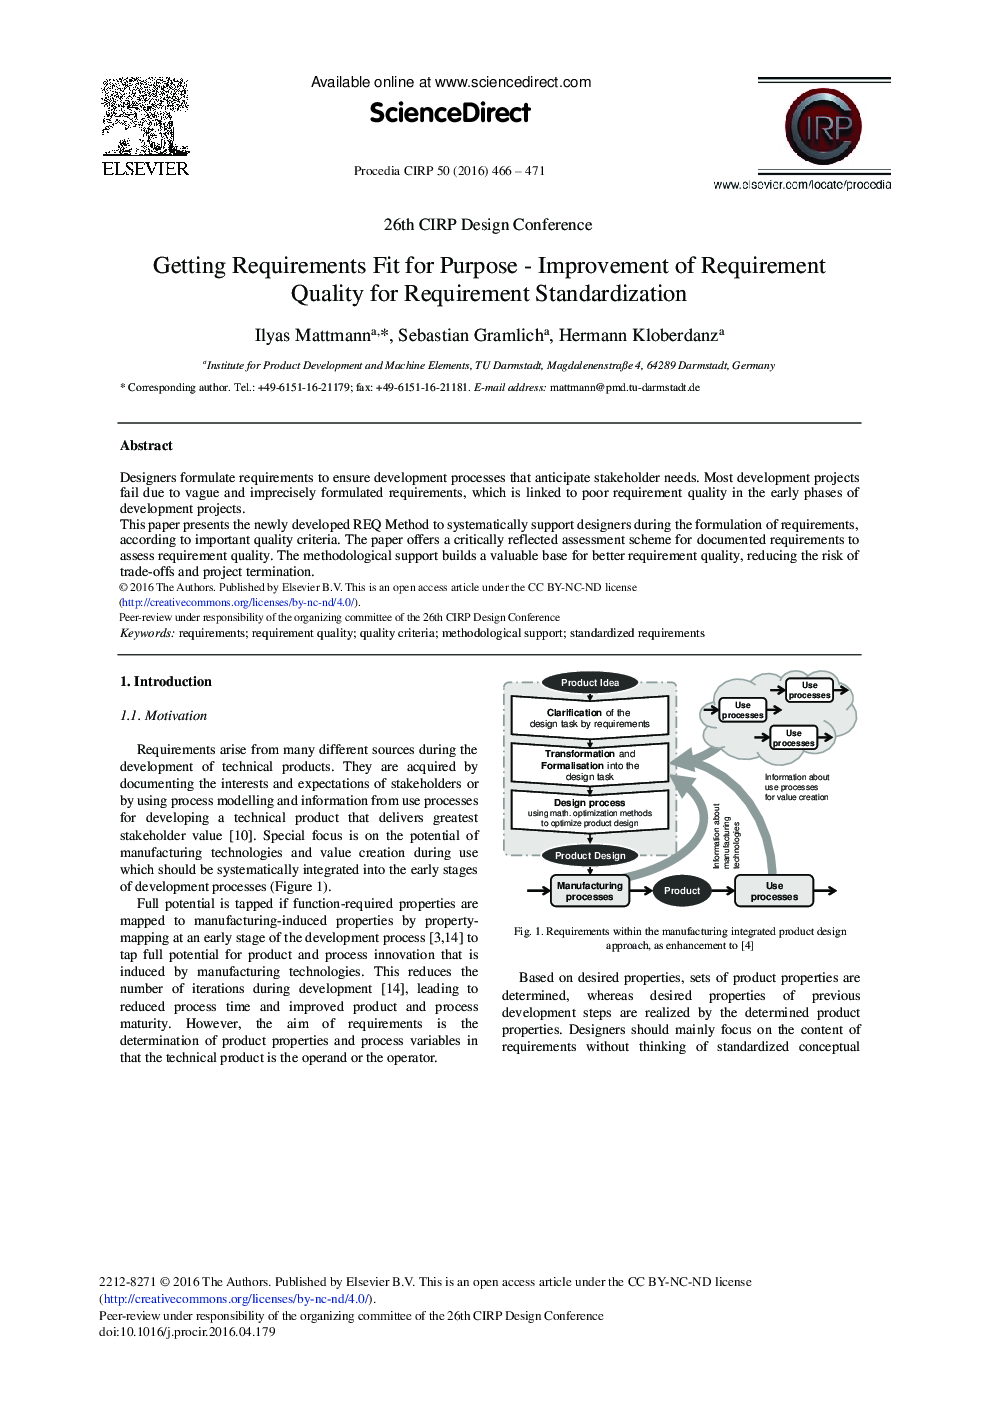 Getting Requirements Fit for Purpose - Improvement of Requirement Quality for Requirement Standardization 